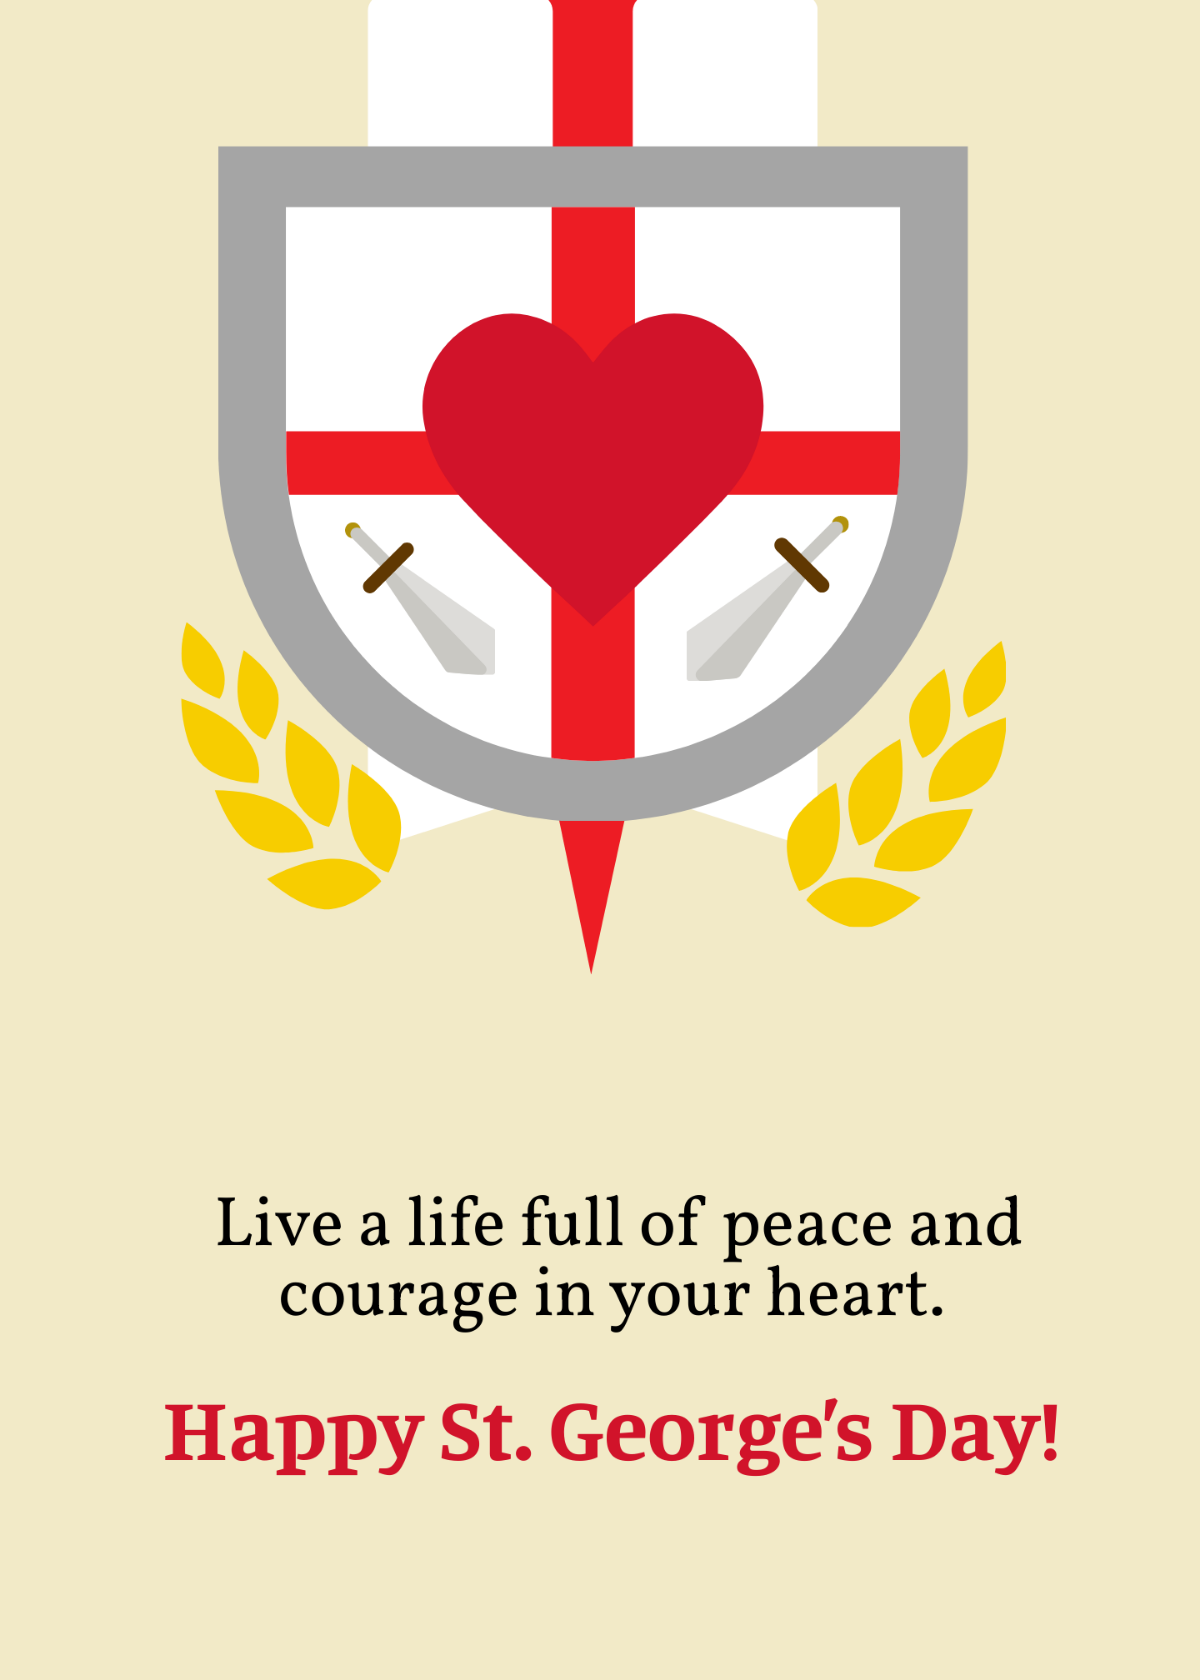 St. George's Day Greeting Template